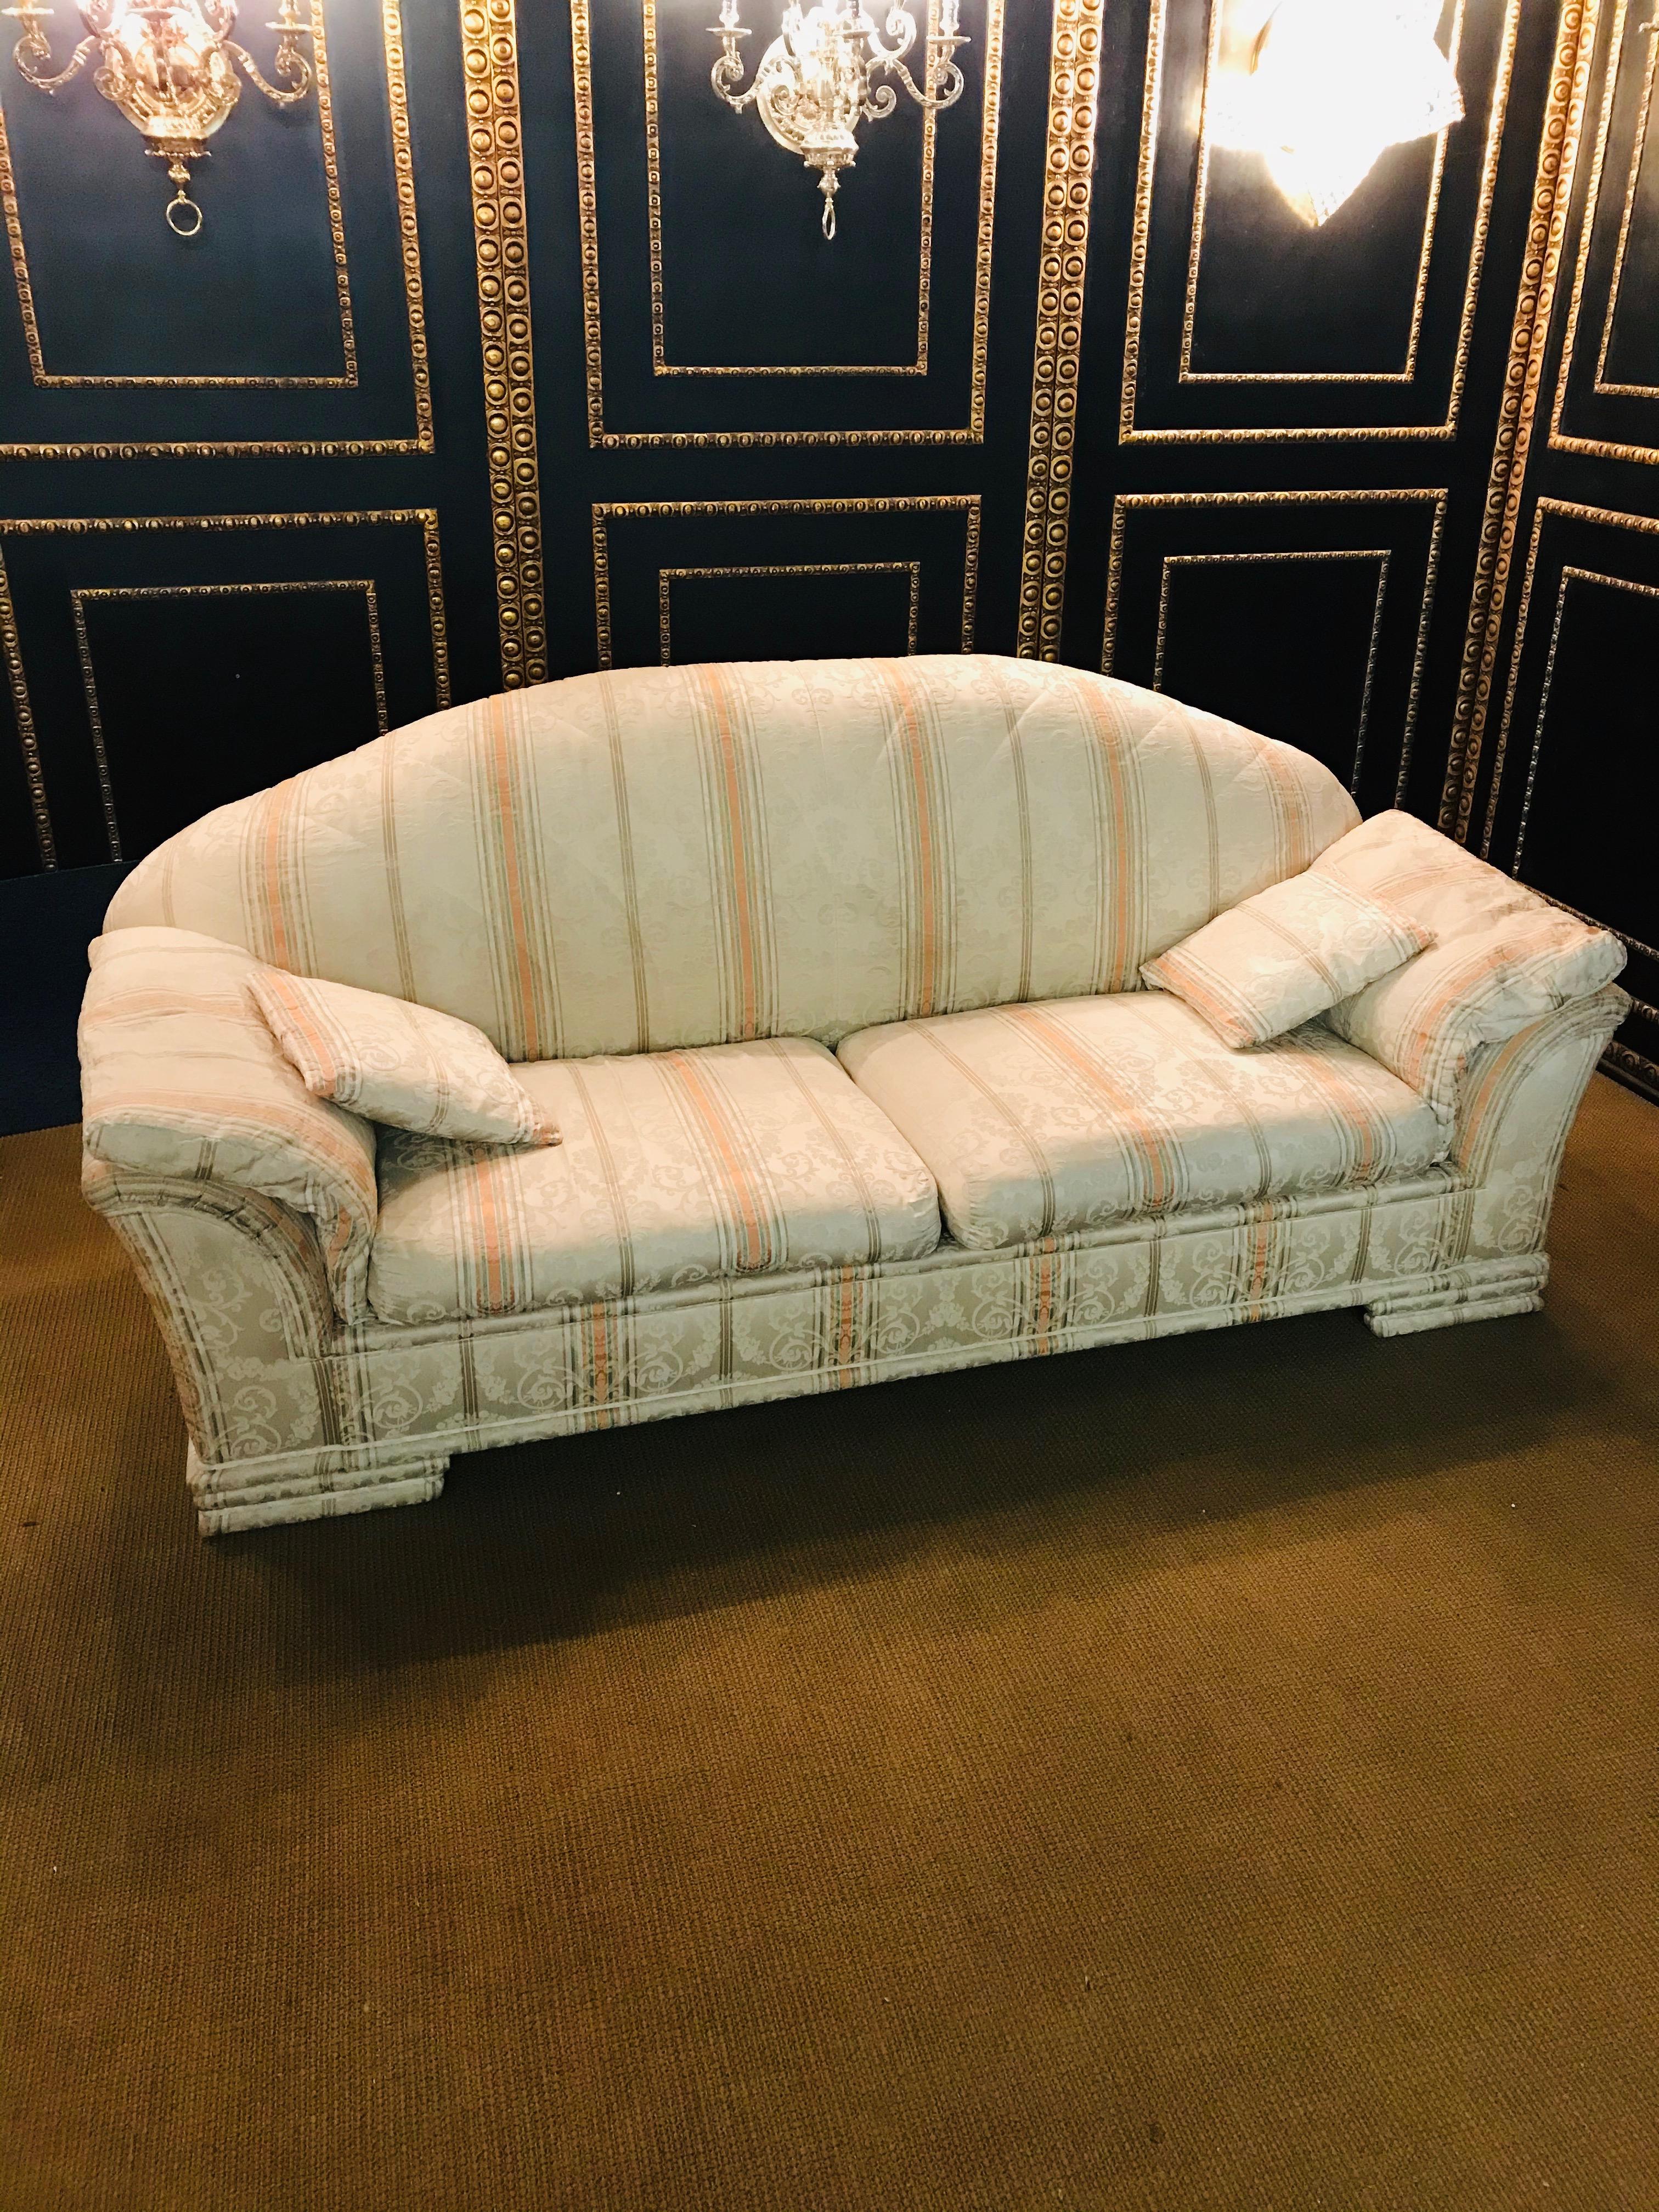 German Very High-Quality Couch Set from the Bielefeld Workshops with Baroque Patterns